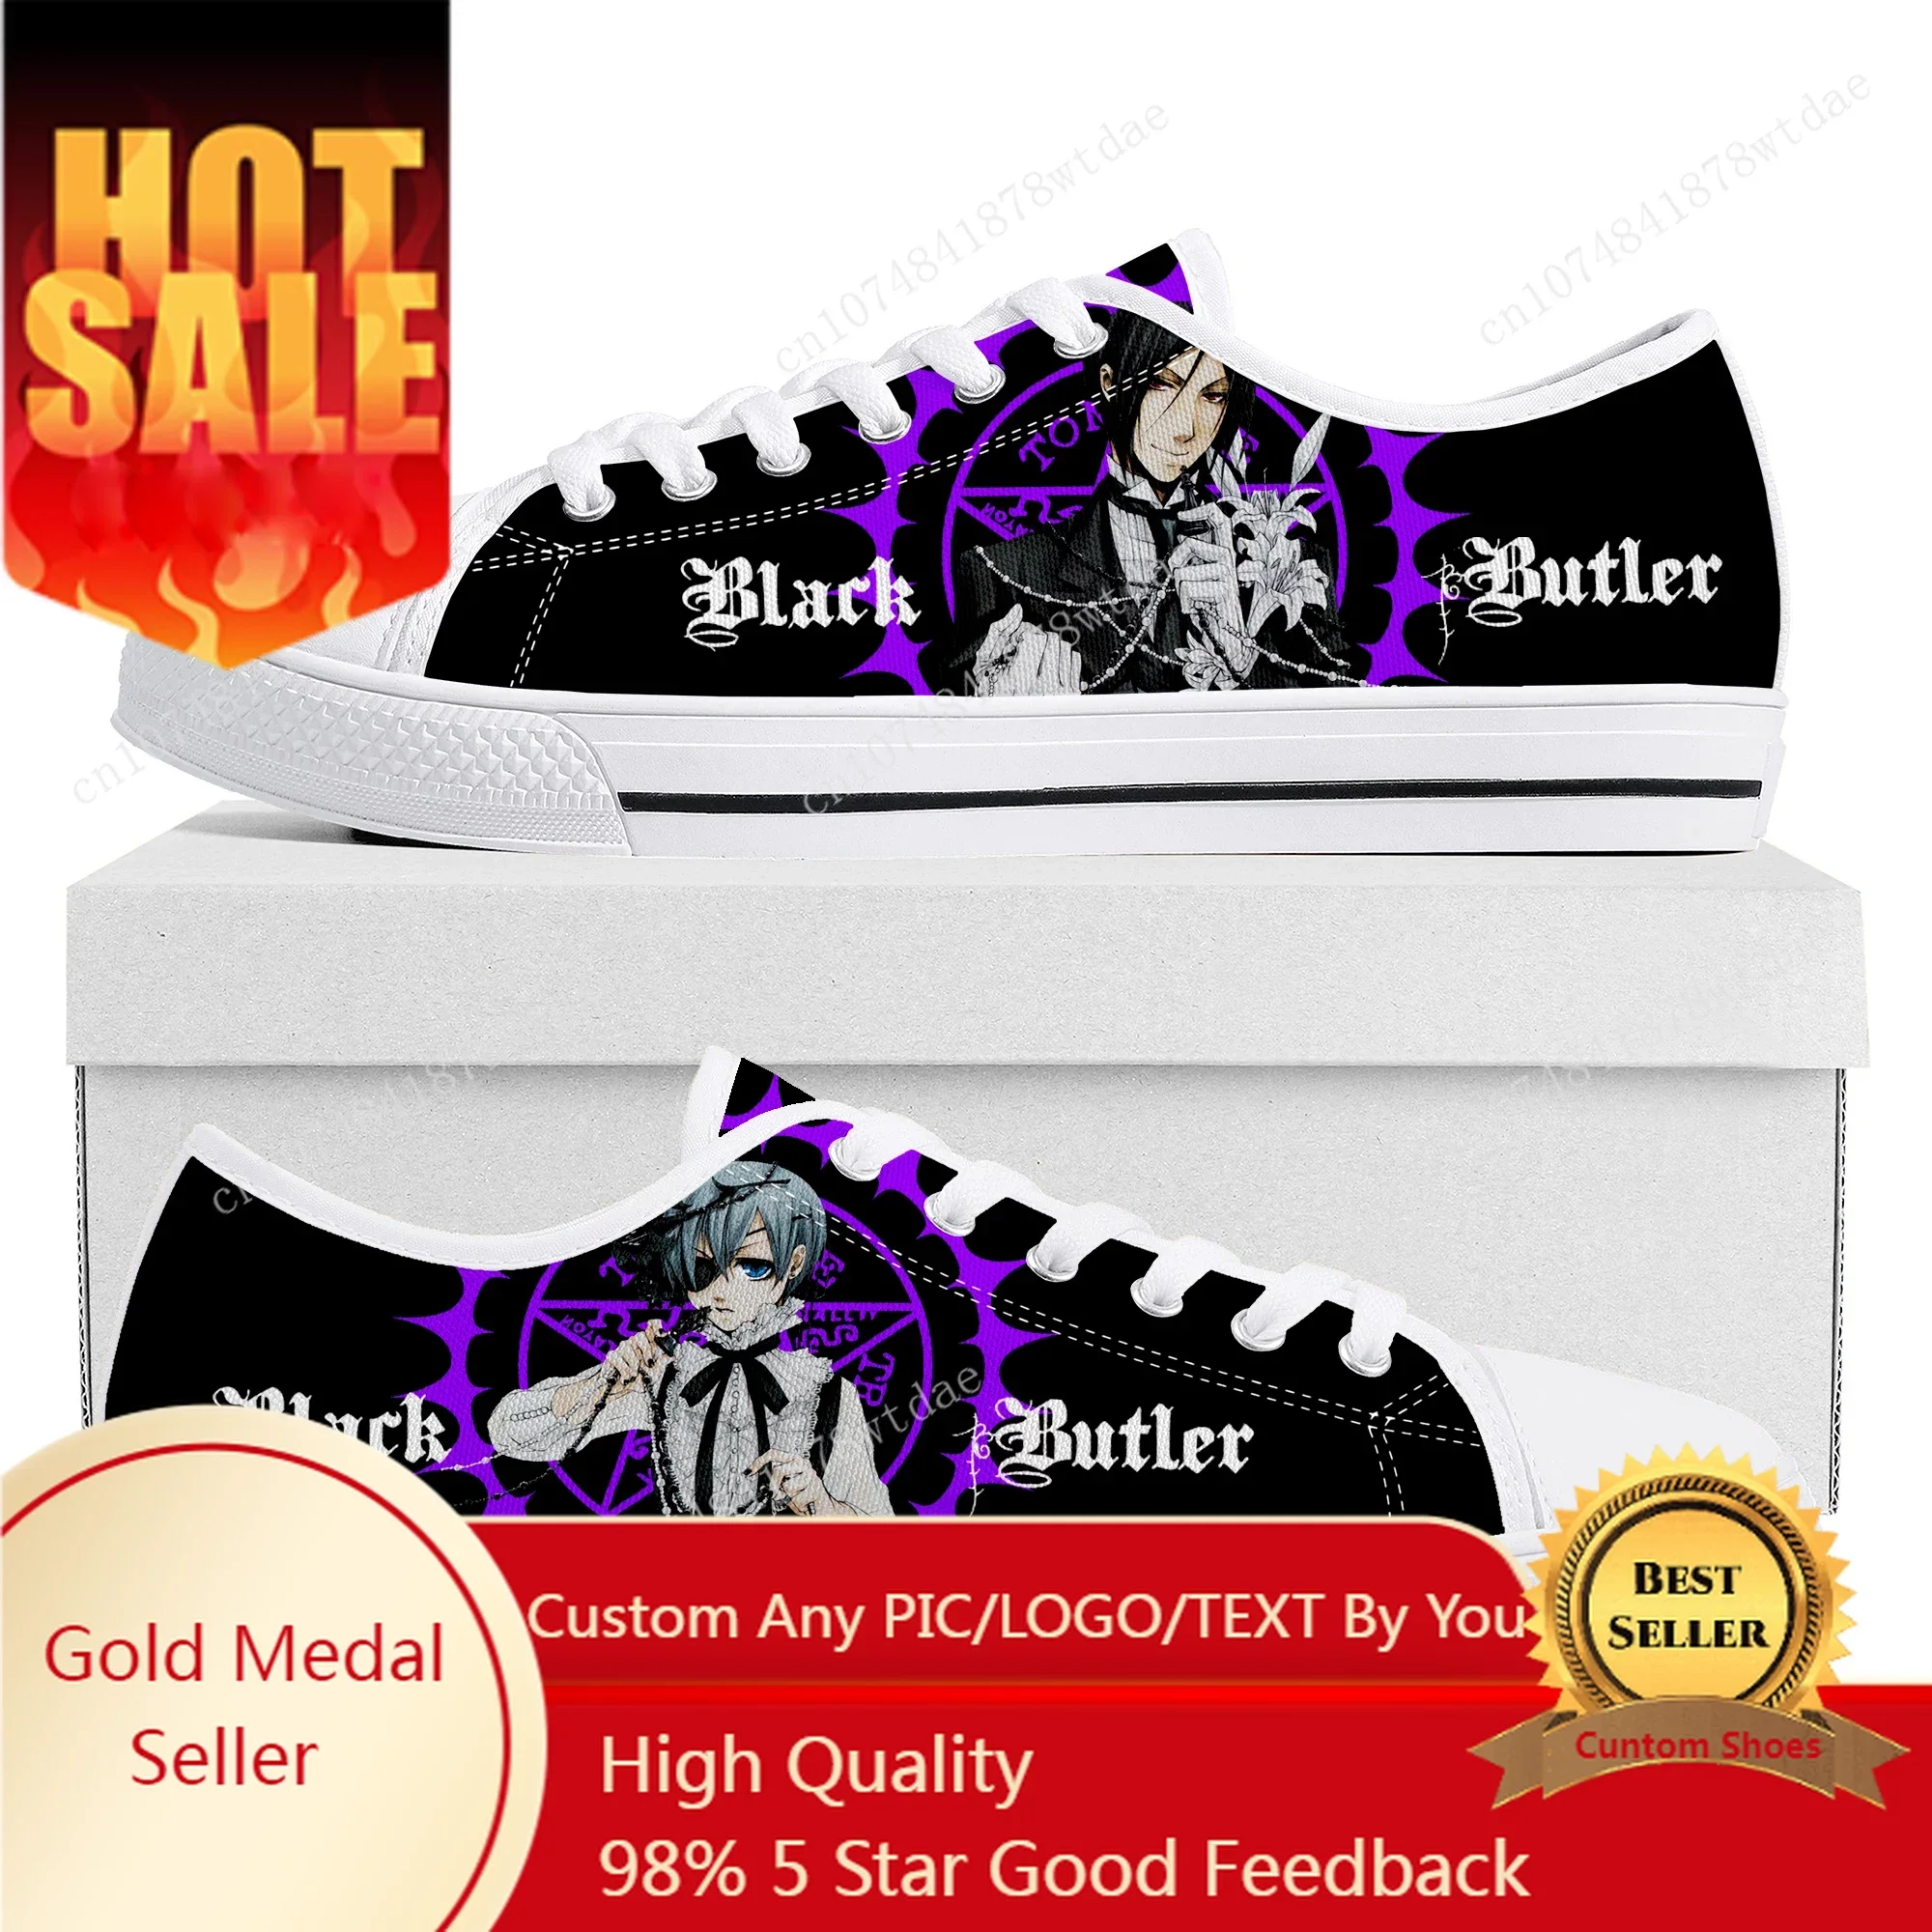 

Black Butler Low Top Sneakers Womens Mens Teenager High Quality Canvas Sneaker Couple Japanese Anime Manga Custom Made Shoes